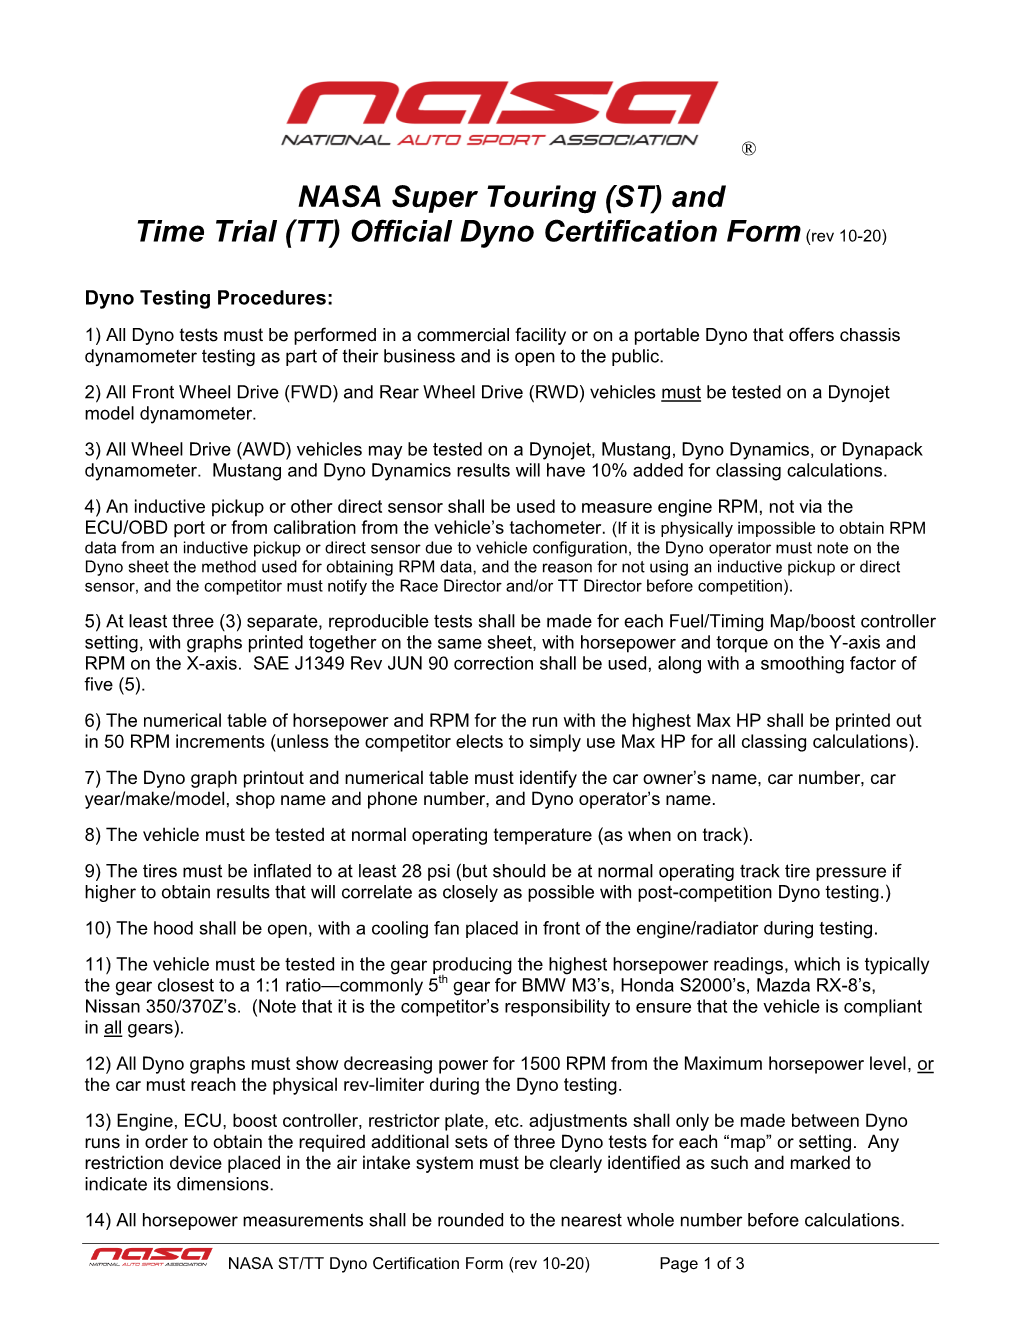 NASA Super Touring (ST) and Time Trial (TT) Official Dyno Certification Form(Rev 10-20)